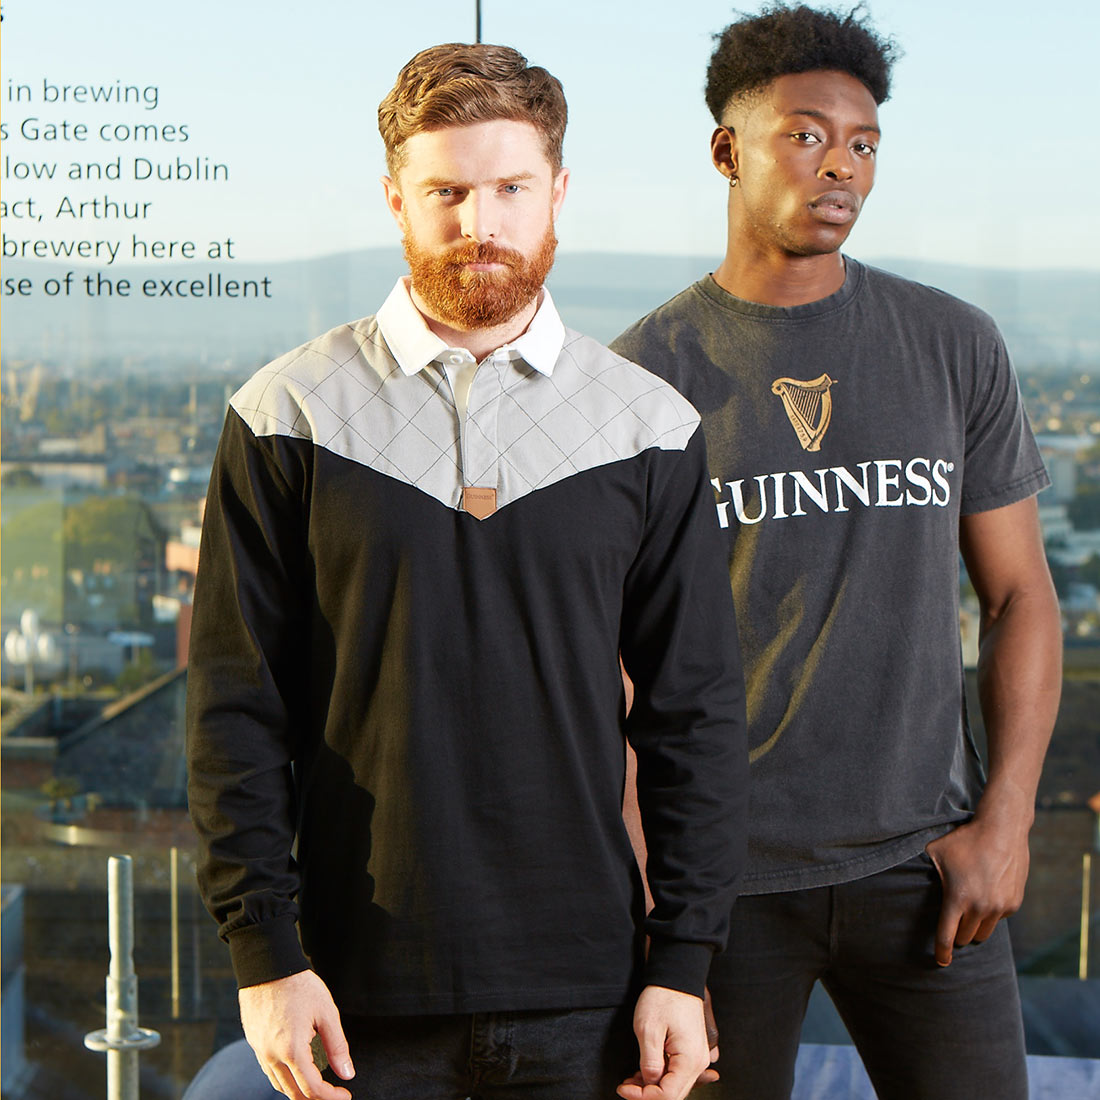 Two men standing next to each other wearing Guinness Guinness Heritage Charcoal Grey & Black Long-Sleeve Rugby t-shirts made of cotton fabric.